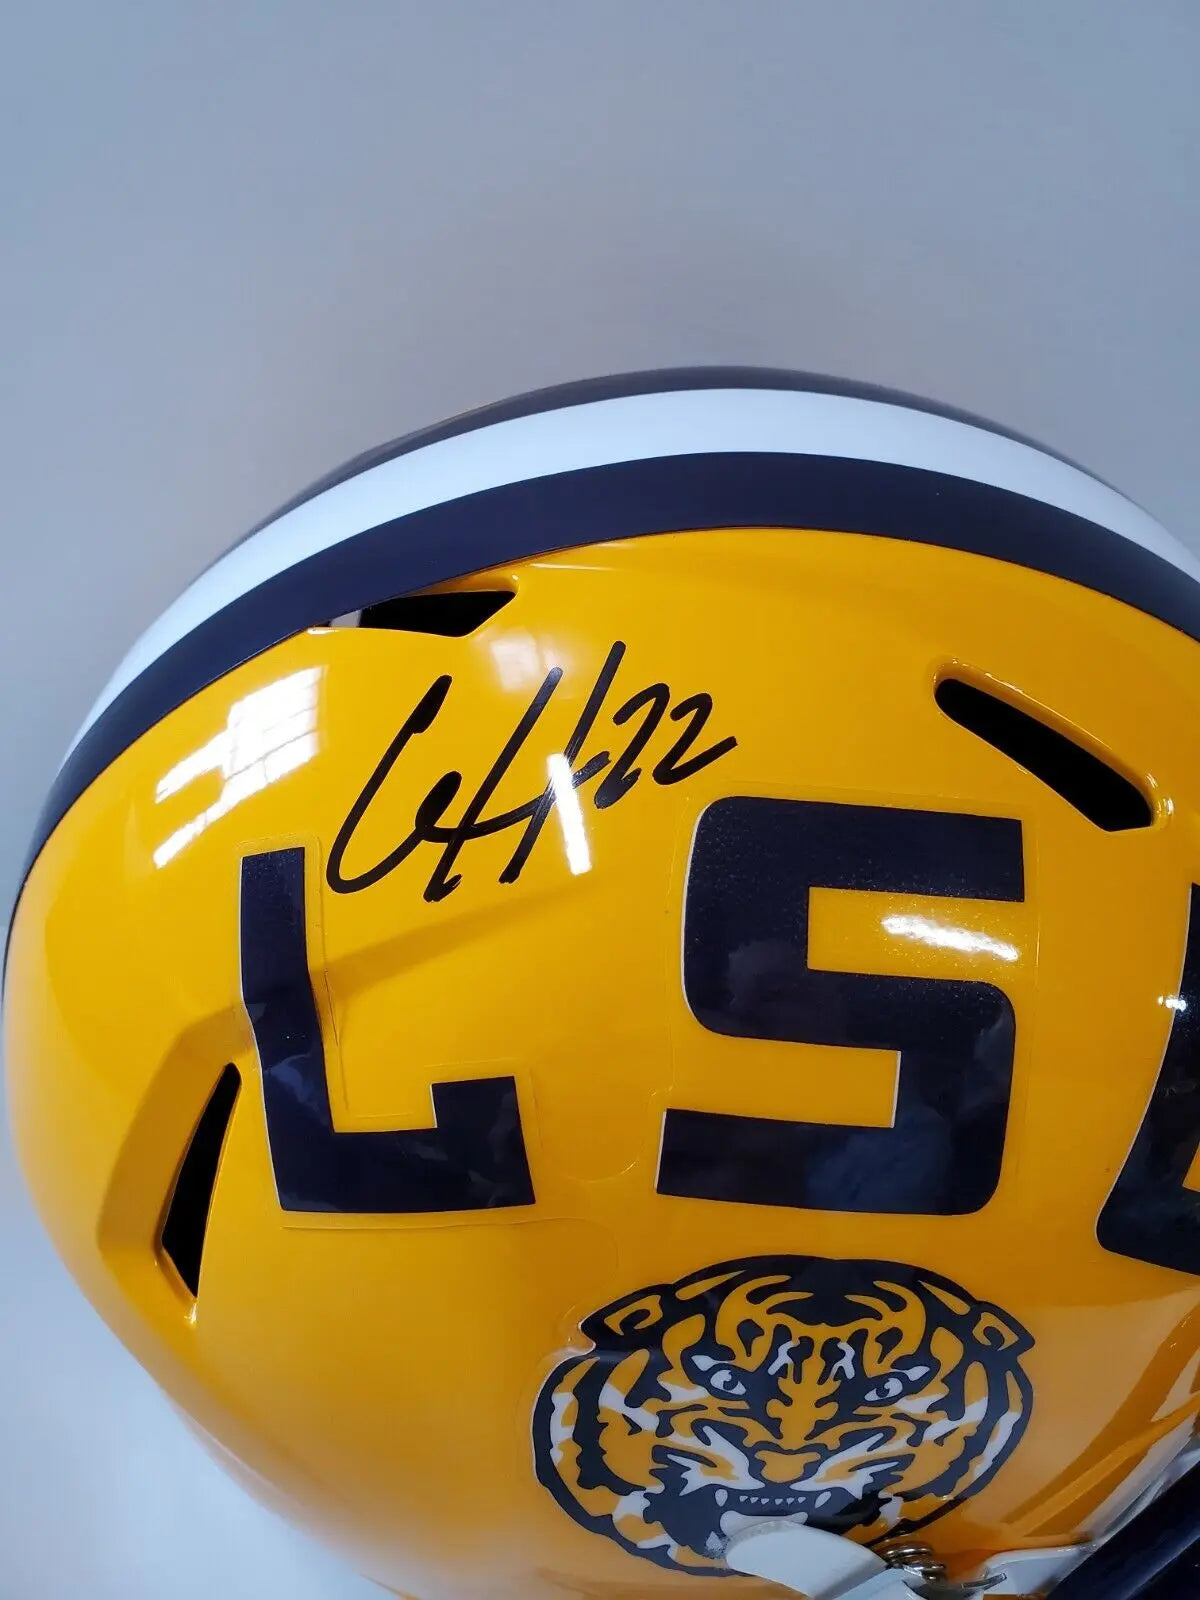 MVP Authentics Clyde Edwards Helaire Signed Lsu Tigers Full Size Replica Helmet Beckett Coa 332.10 sports jersey framing , jersey framing